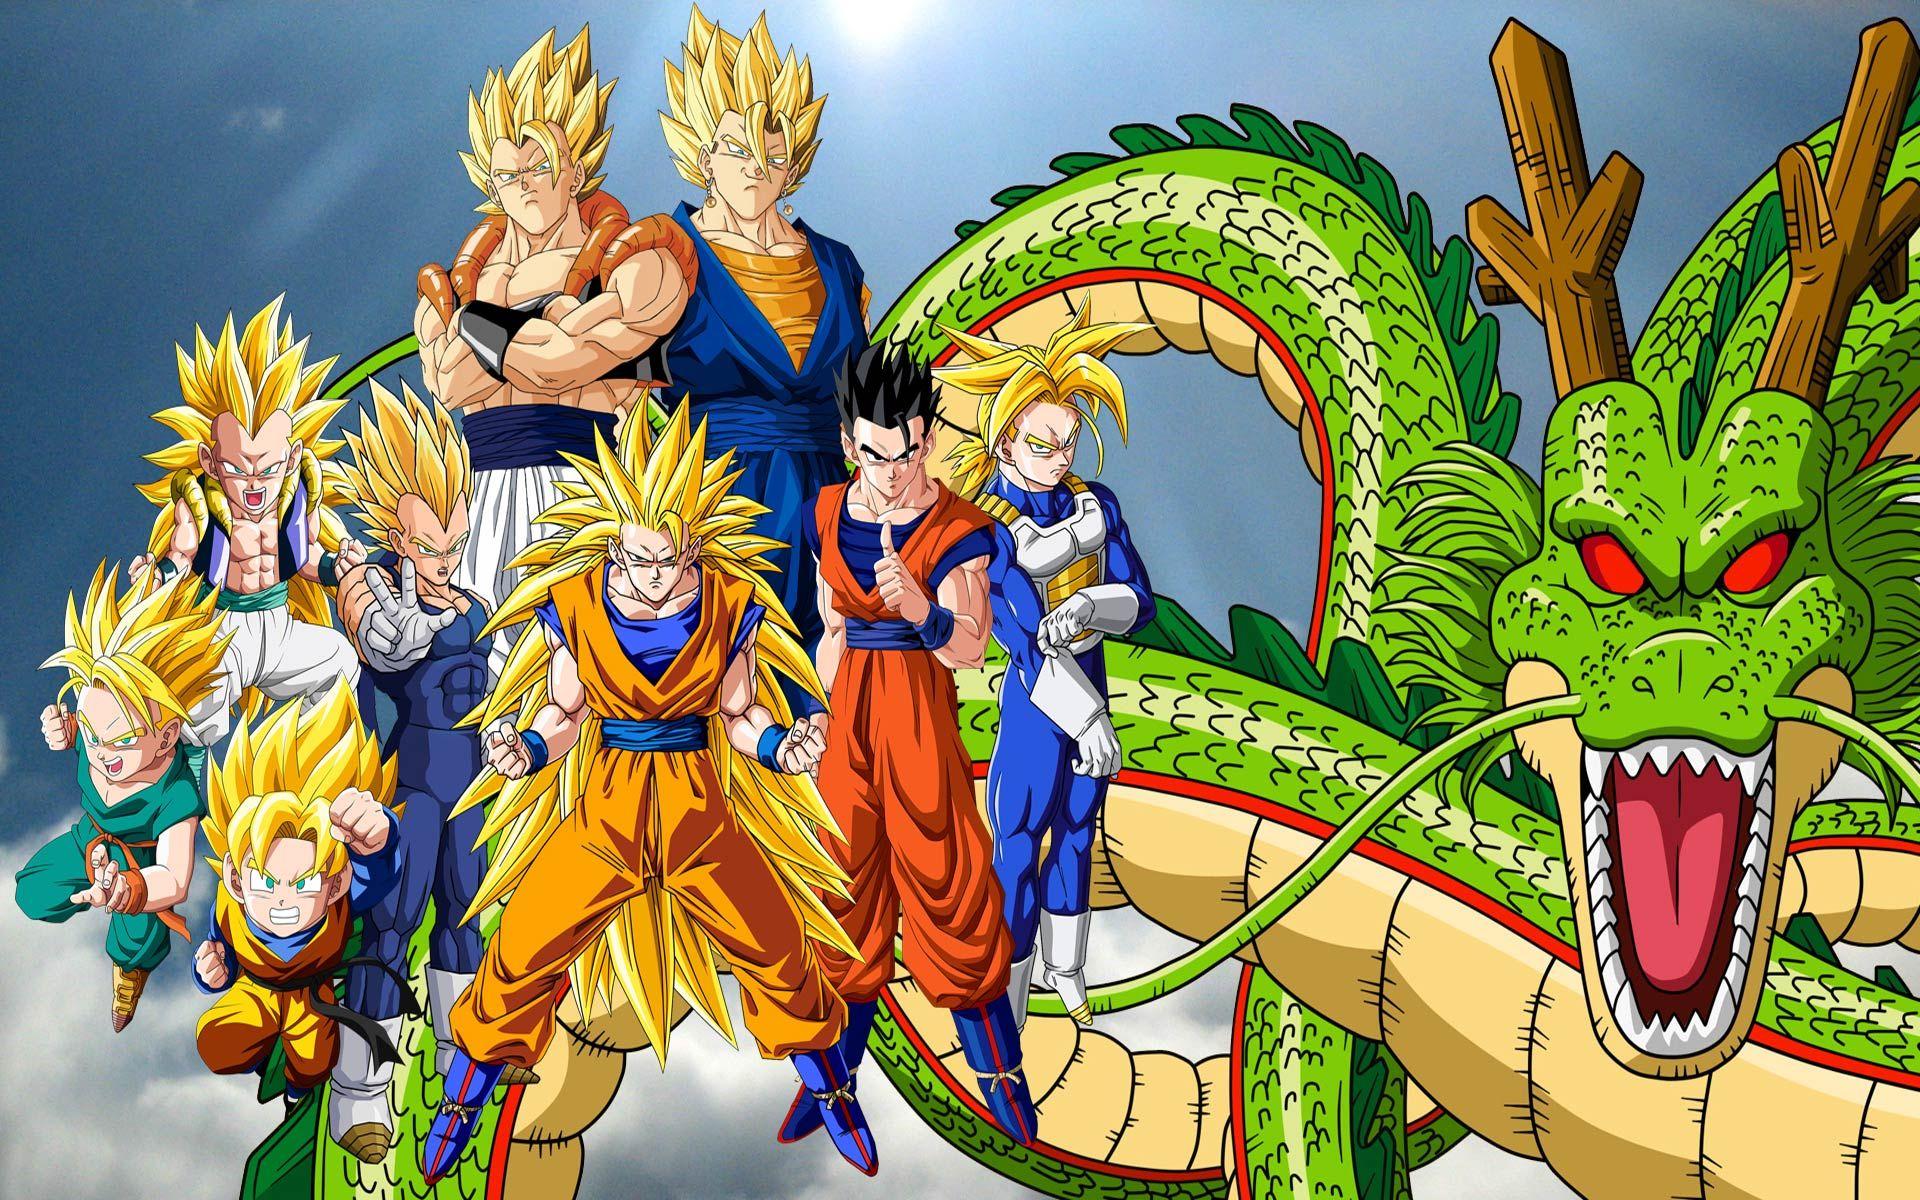 Dragon Ball Z Wallpaper for PC. Full HD Picture